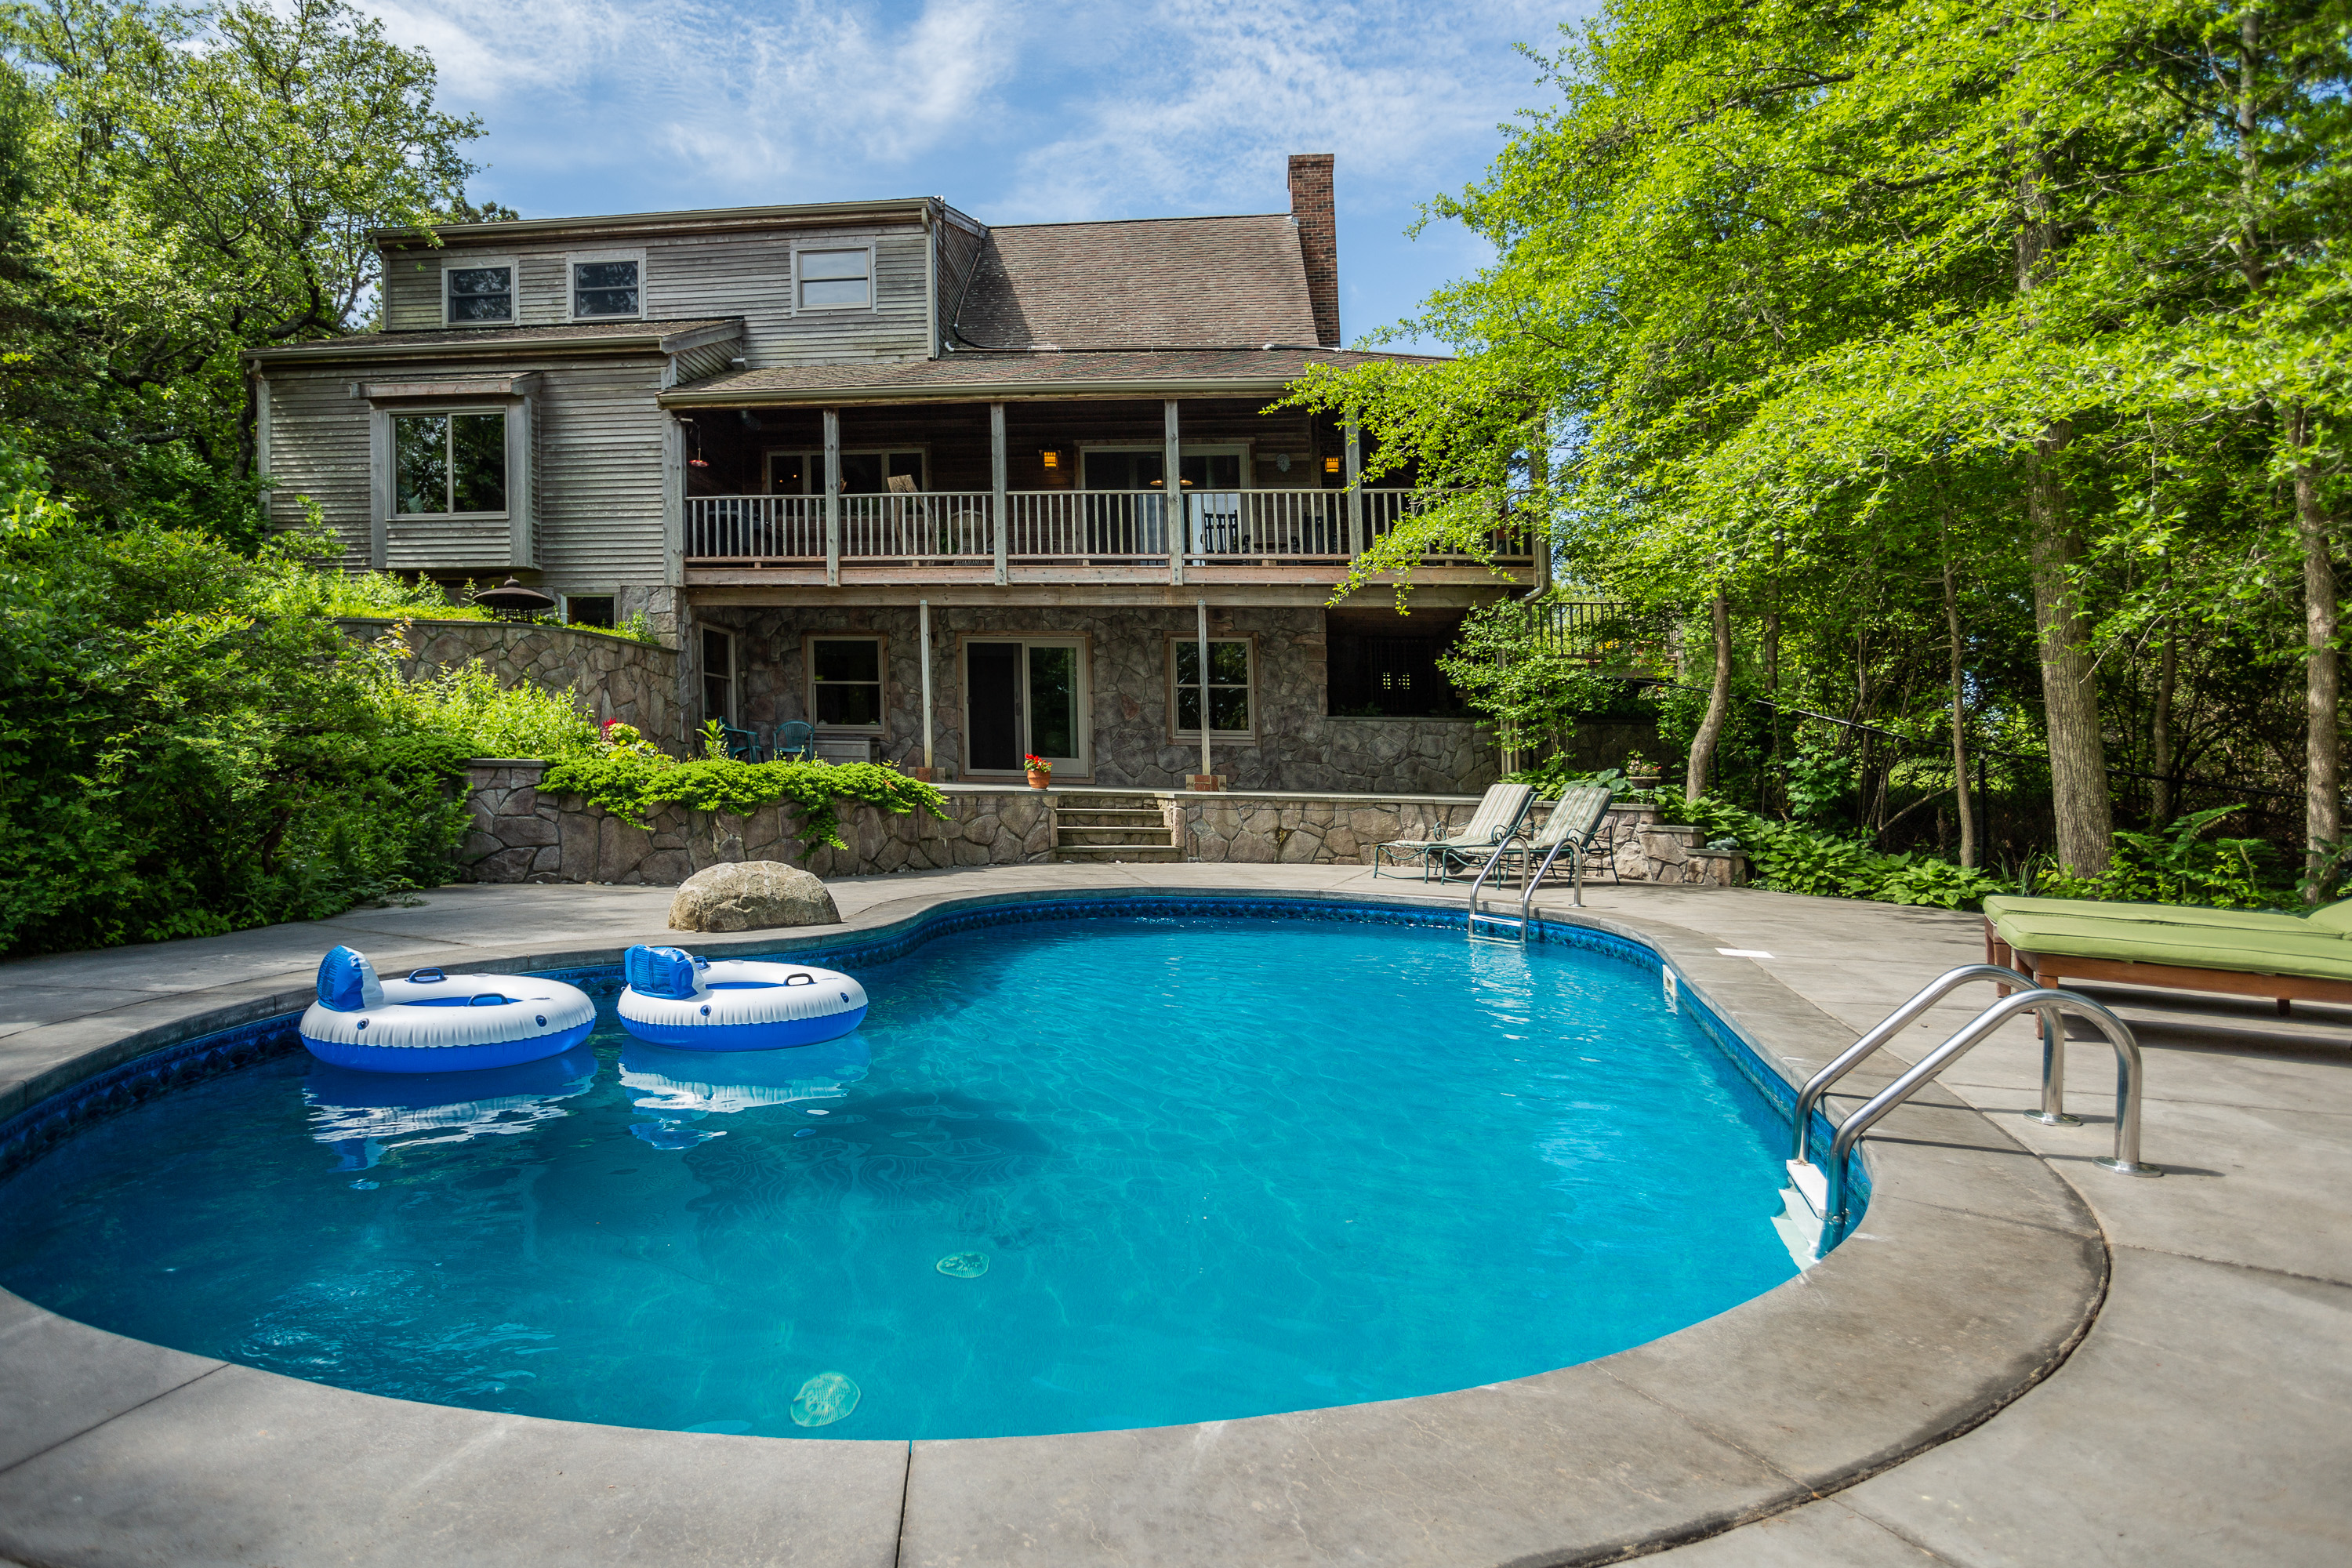 Favorite Homes for Sale in Cape Cod with Pools